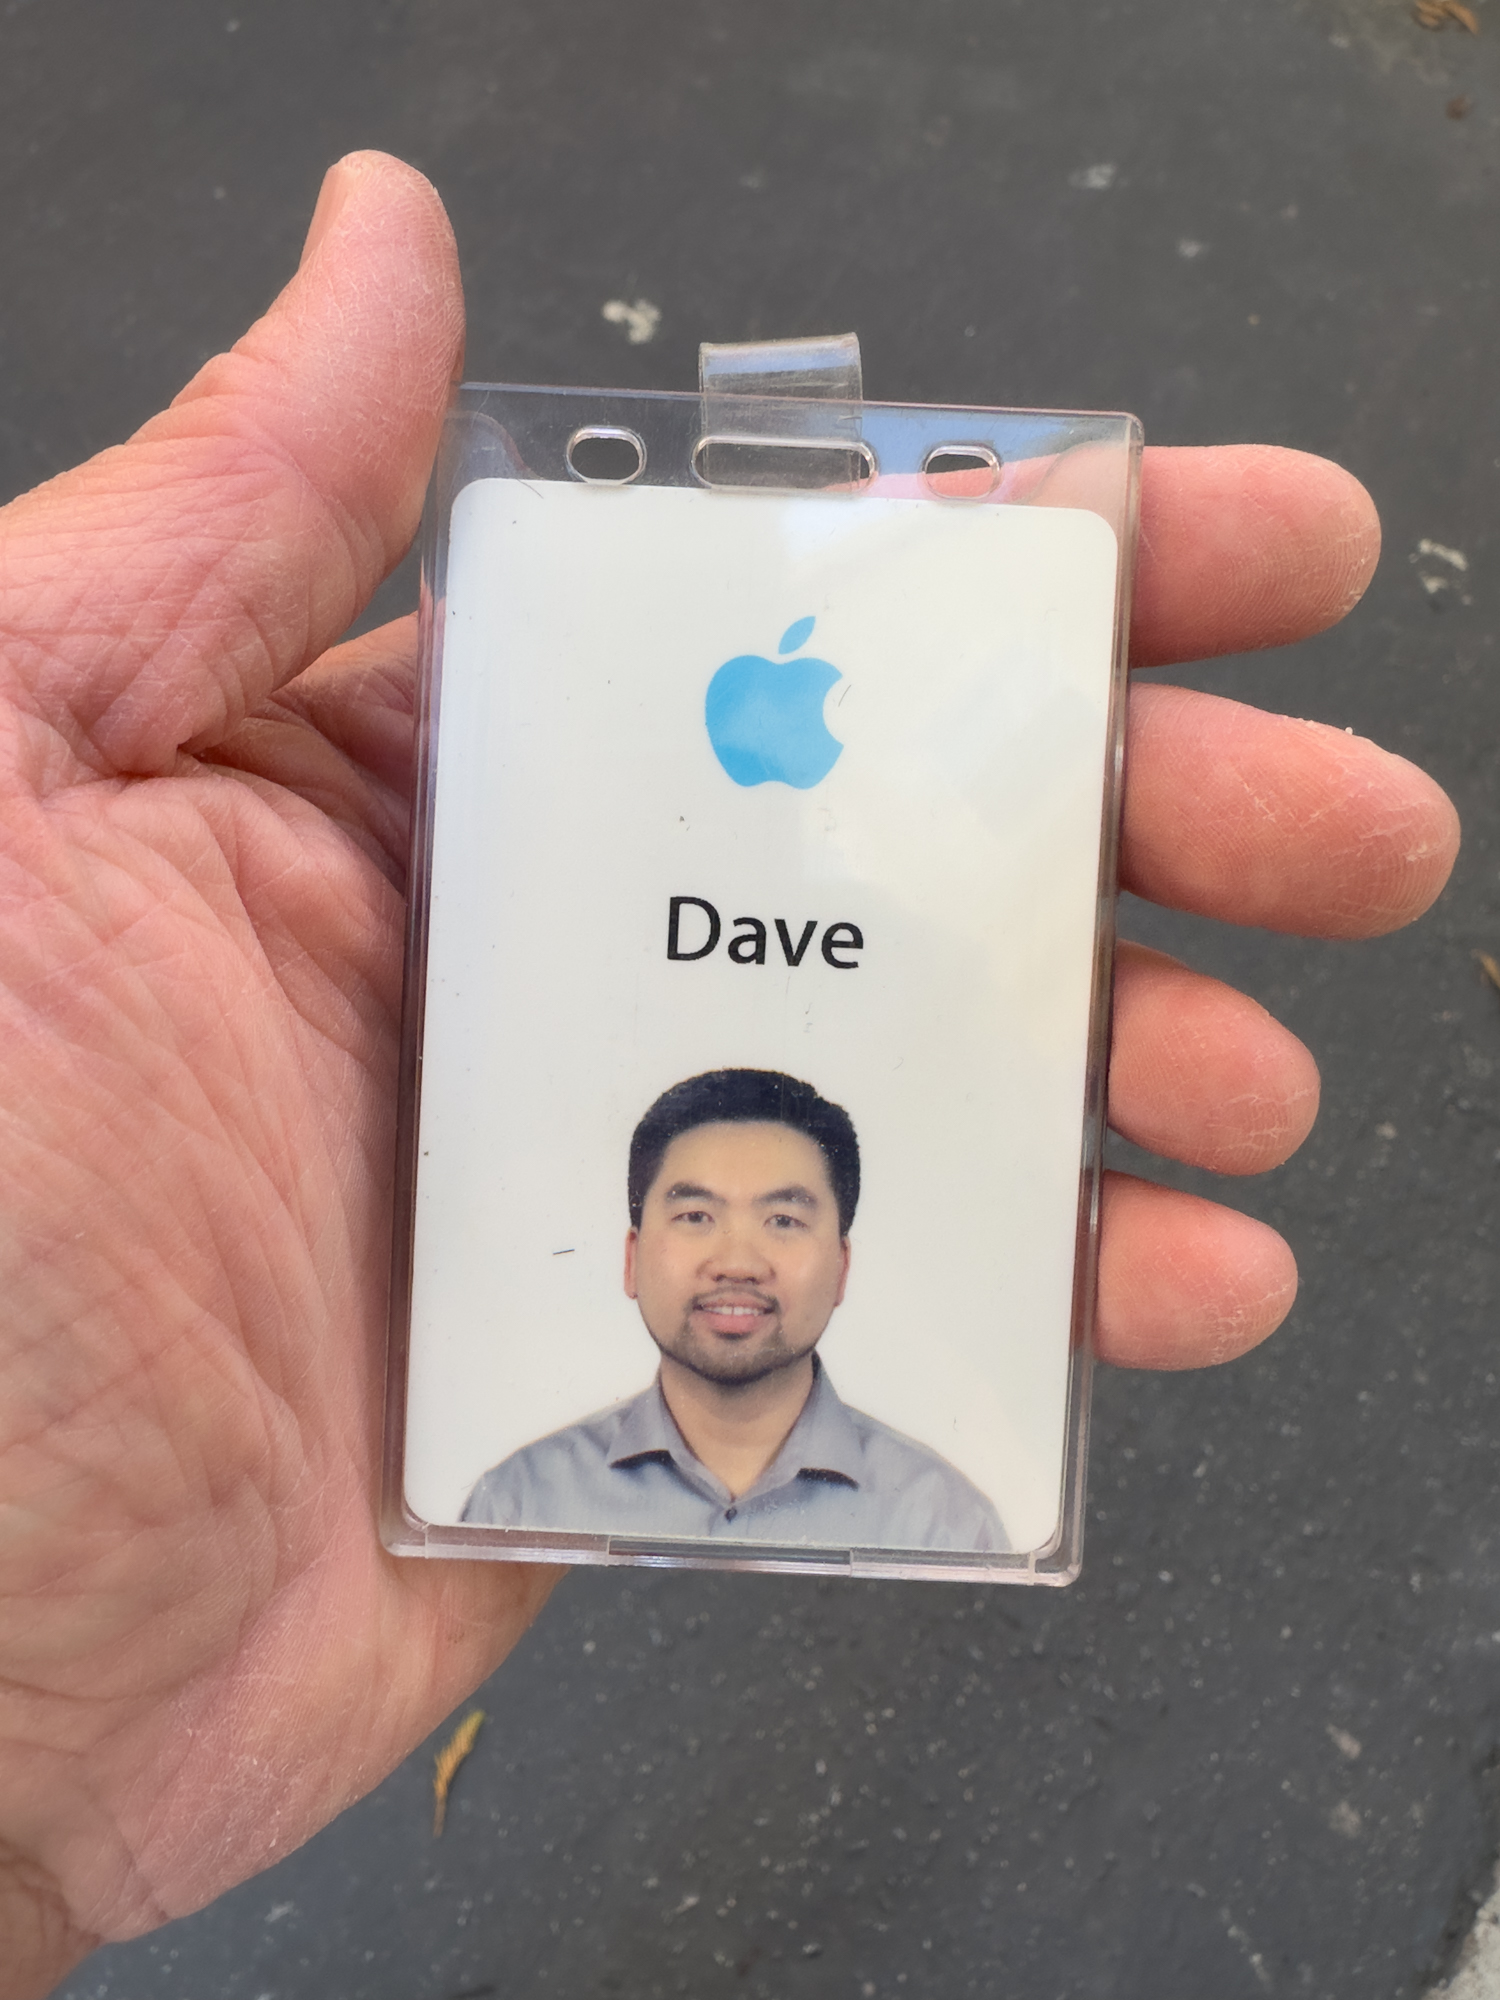 Dave’s Apple badge held in hand